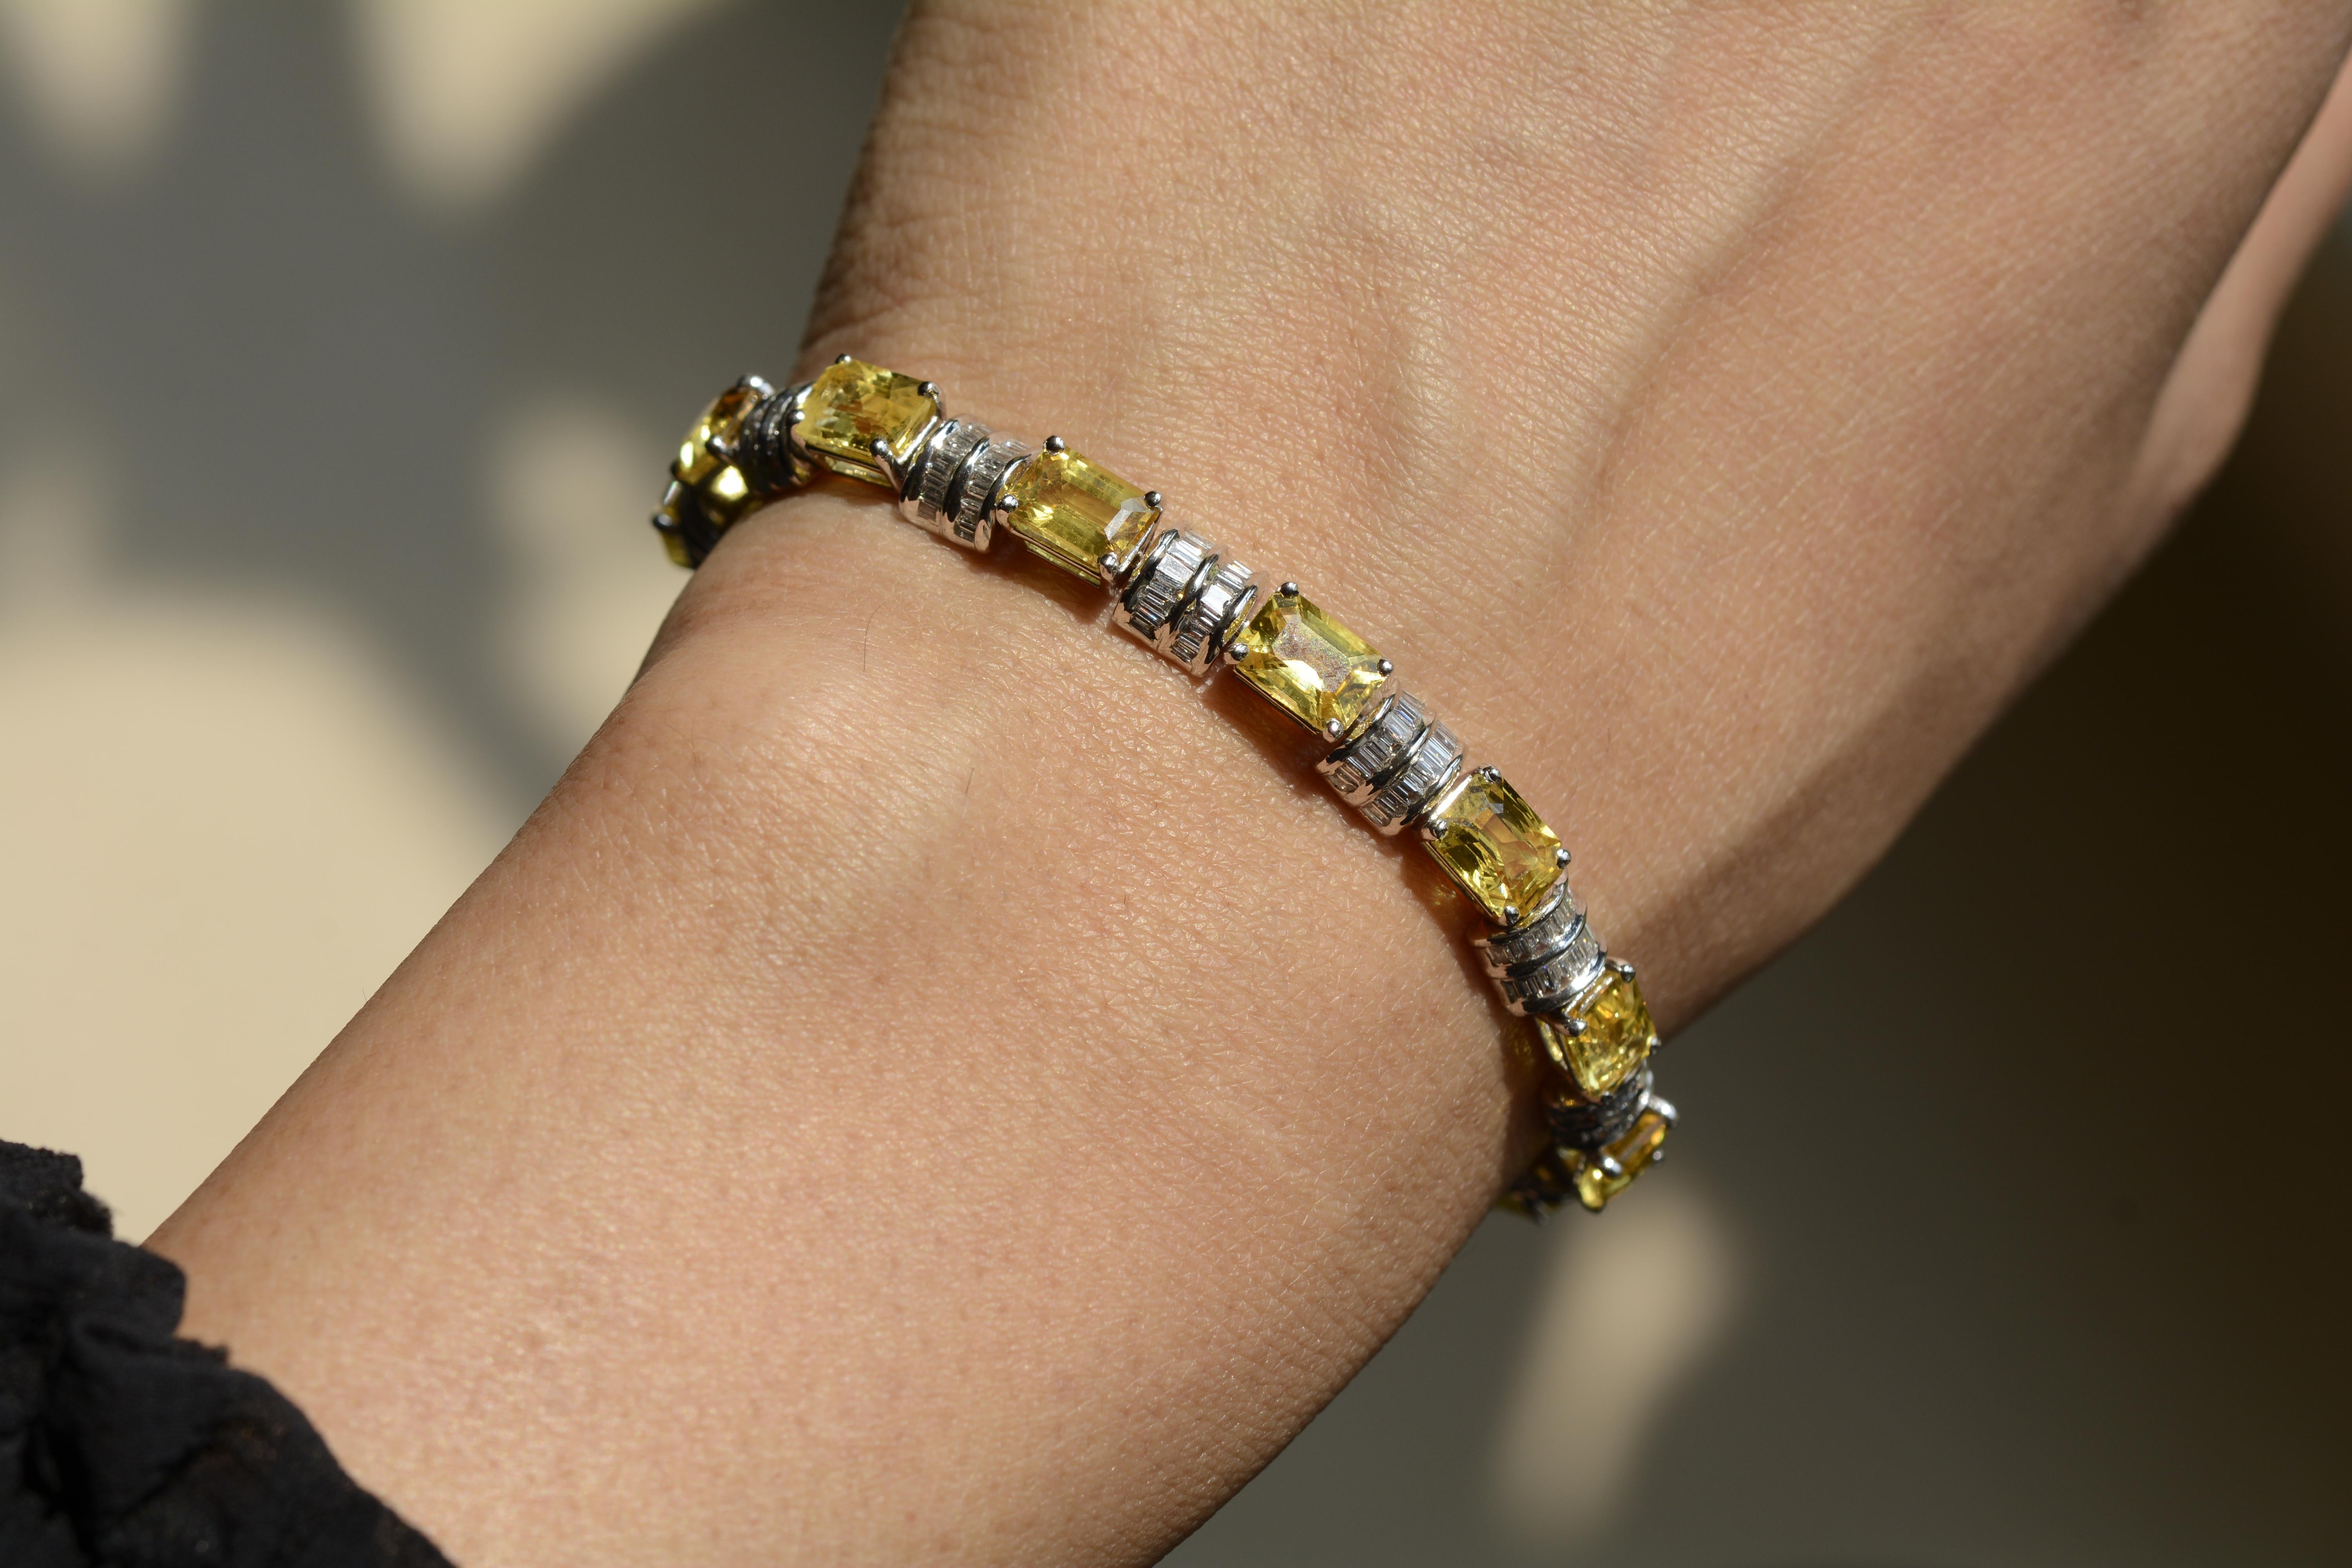 18 Karat White Gold Yellow Sapphire and Diamond Bracelet

Beautiful bracelet set in 18 karat white gold with the perfect fusion of yellow sapphires and white baguette diamonds. This bracelet is ideal for day wear, including parties and